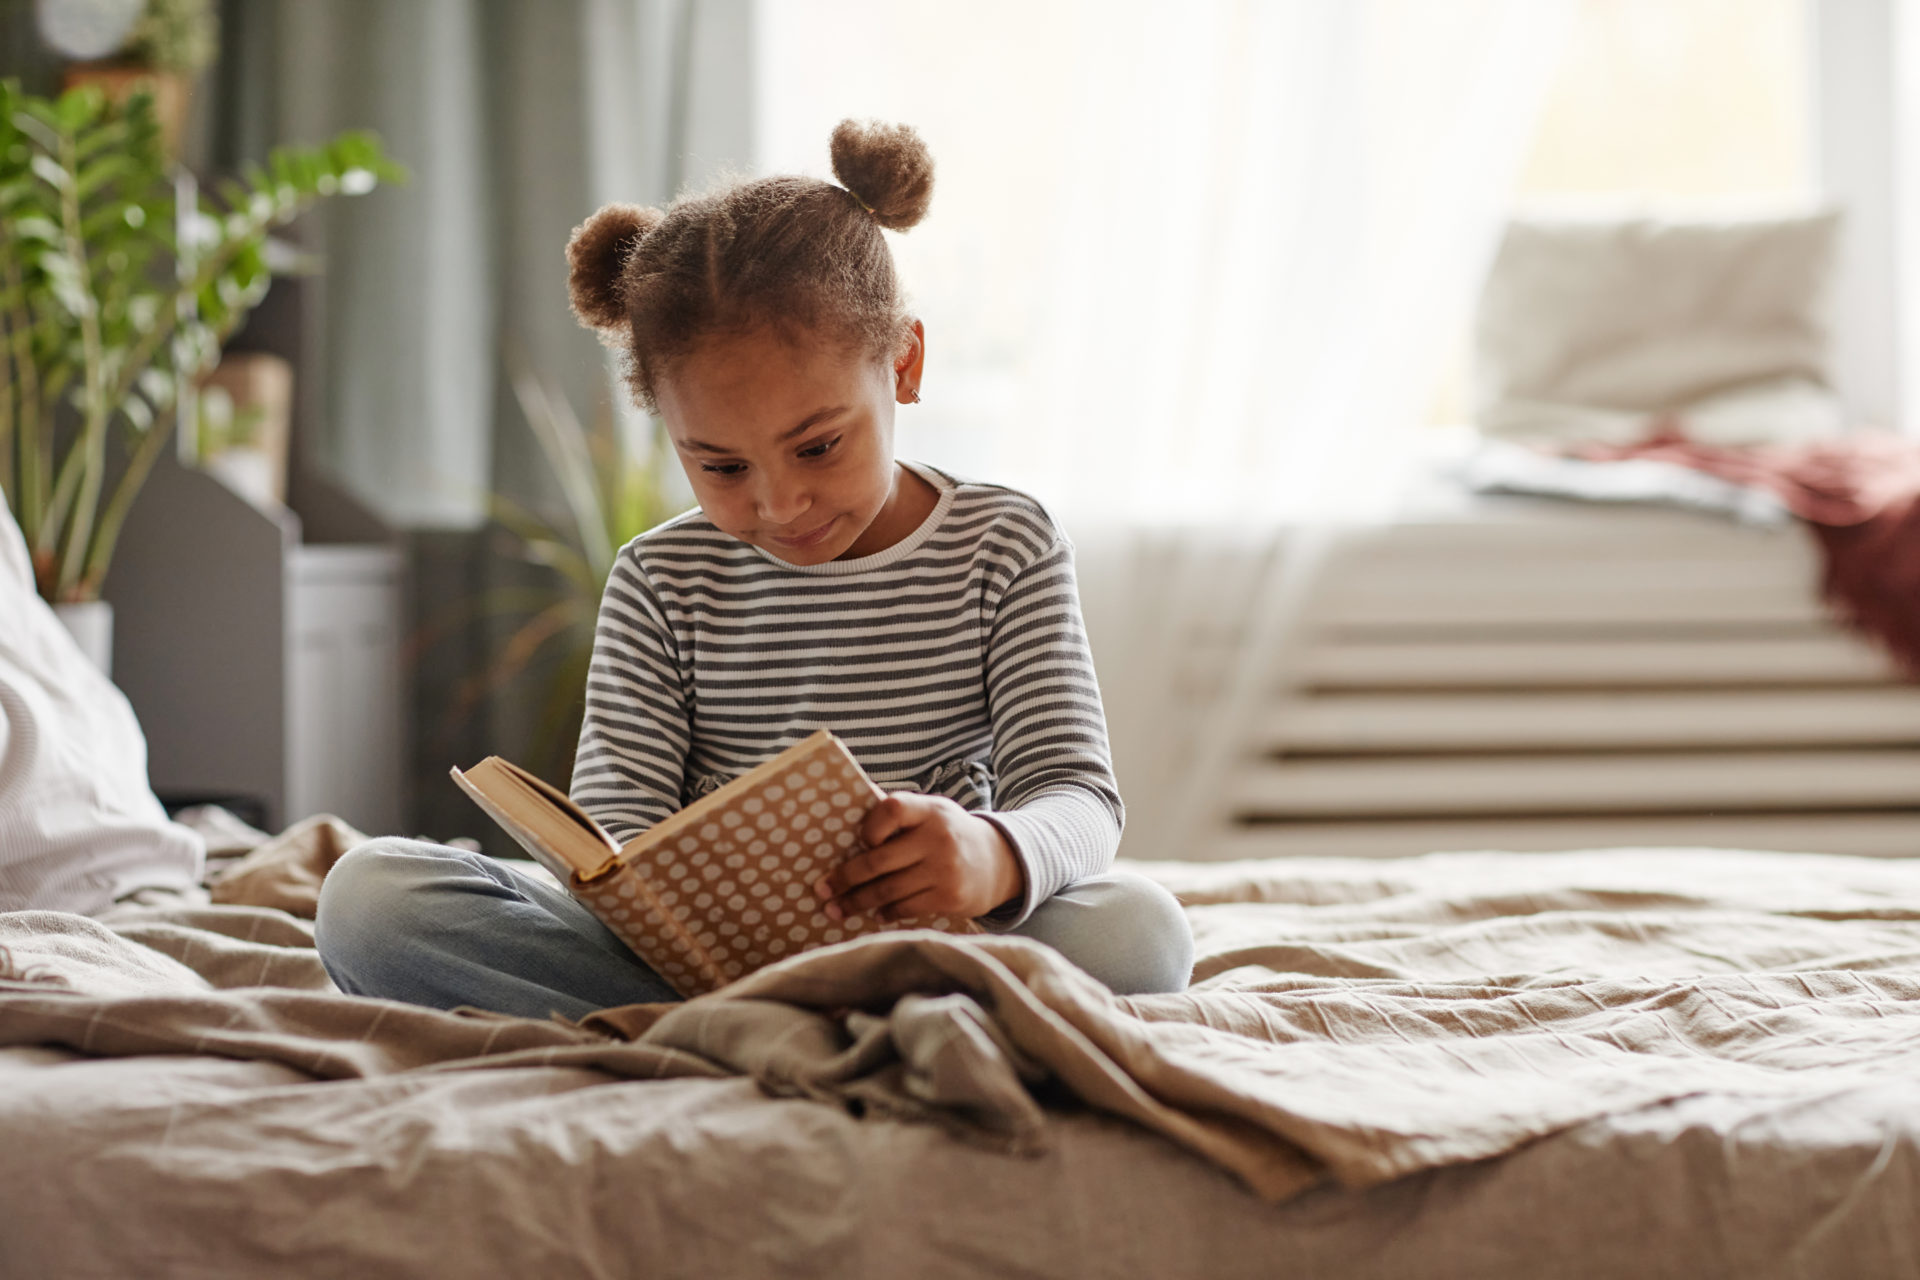 How Soundscapes Help Kids Focus While Reading